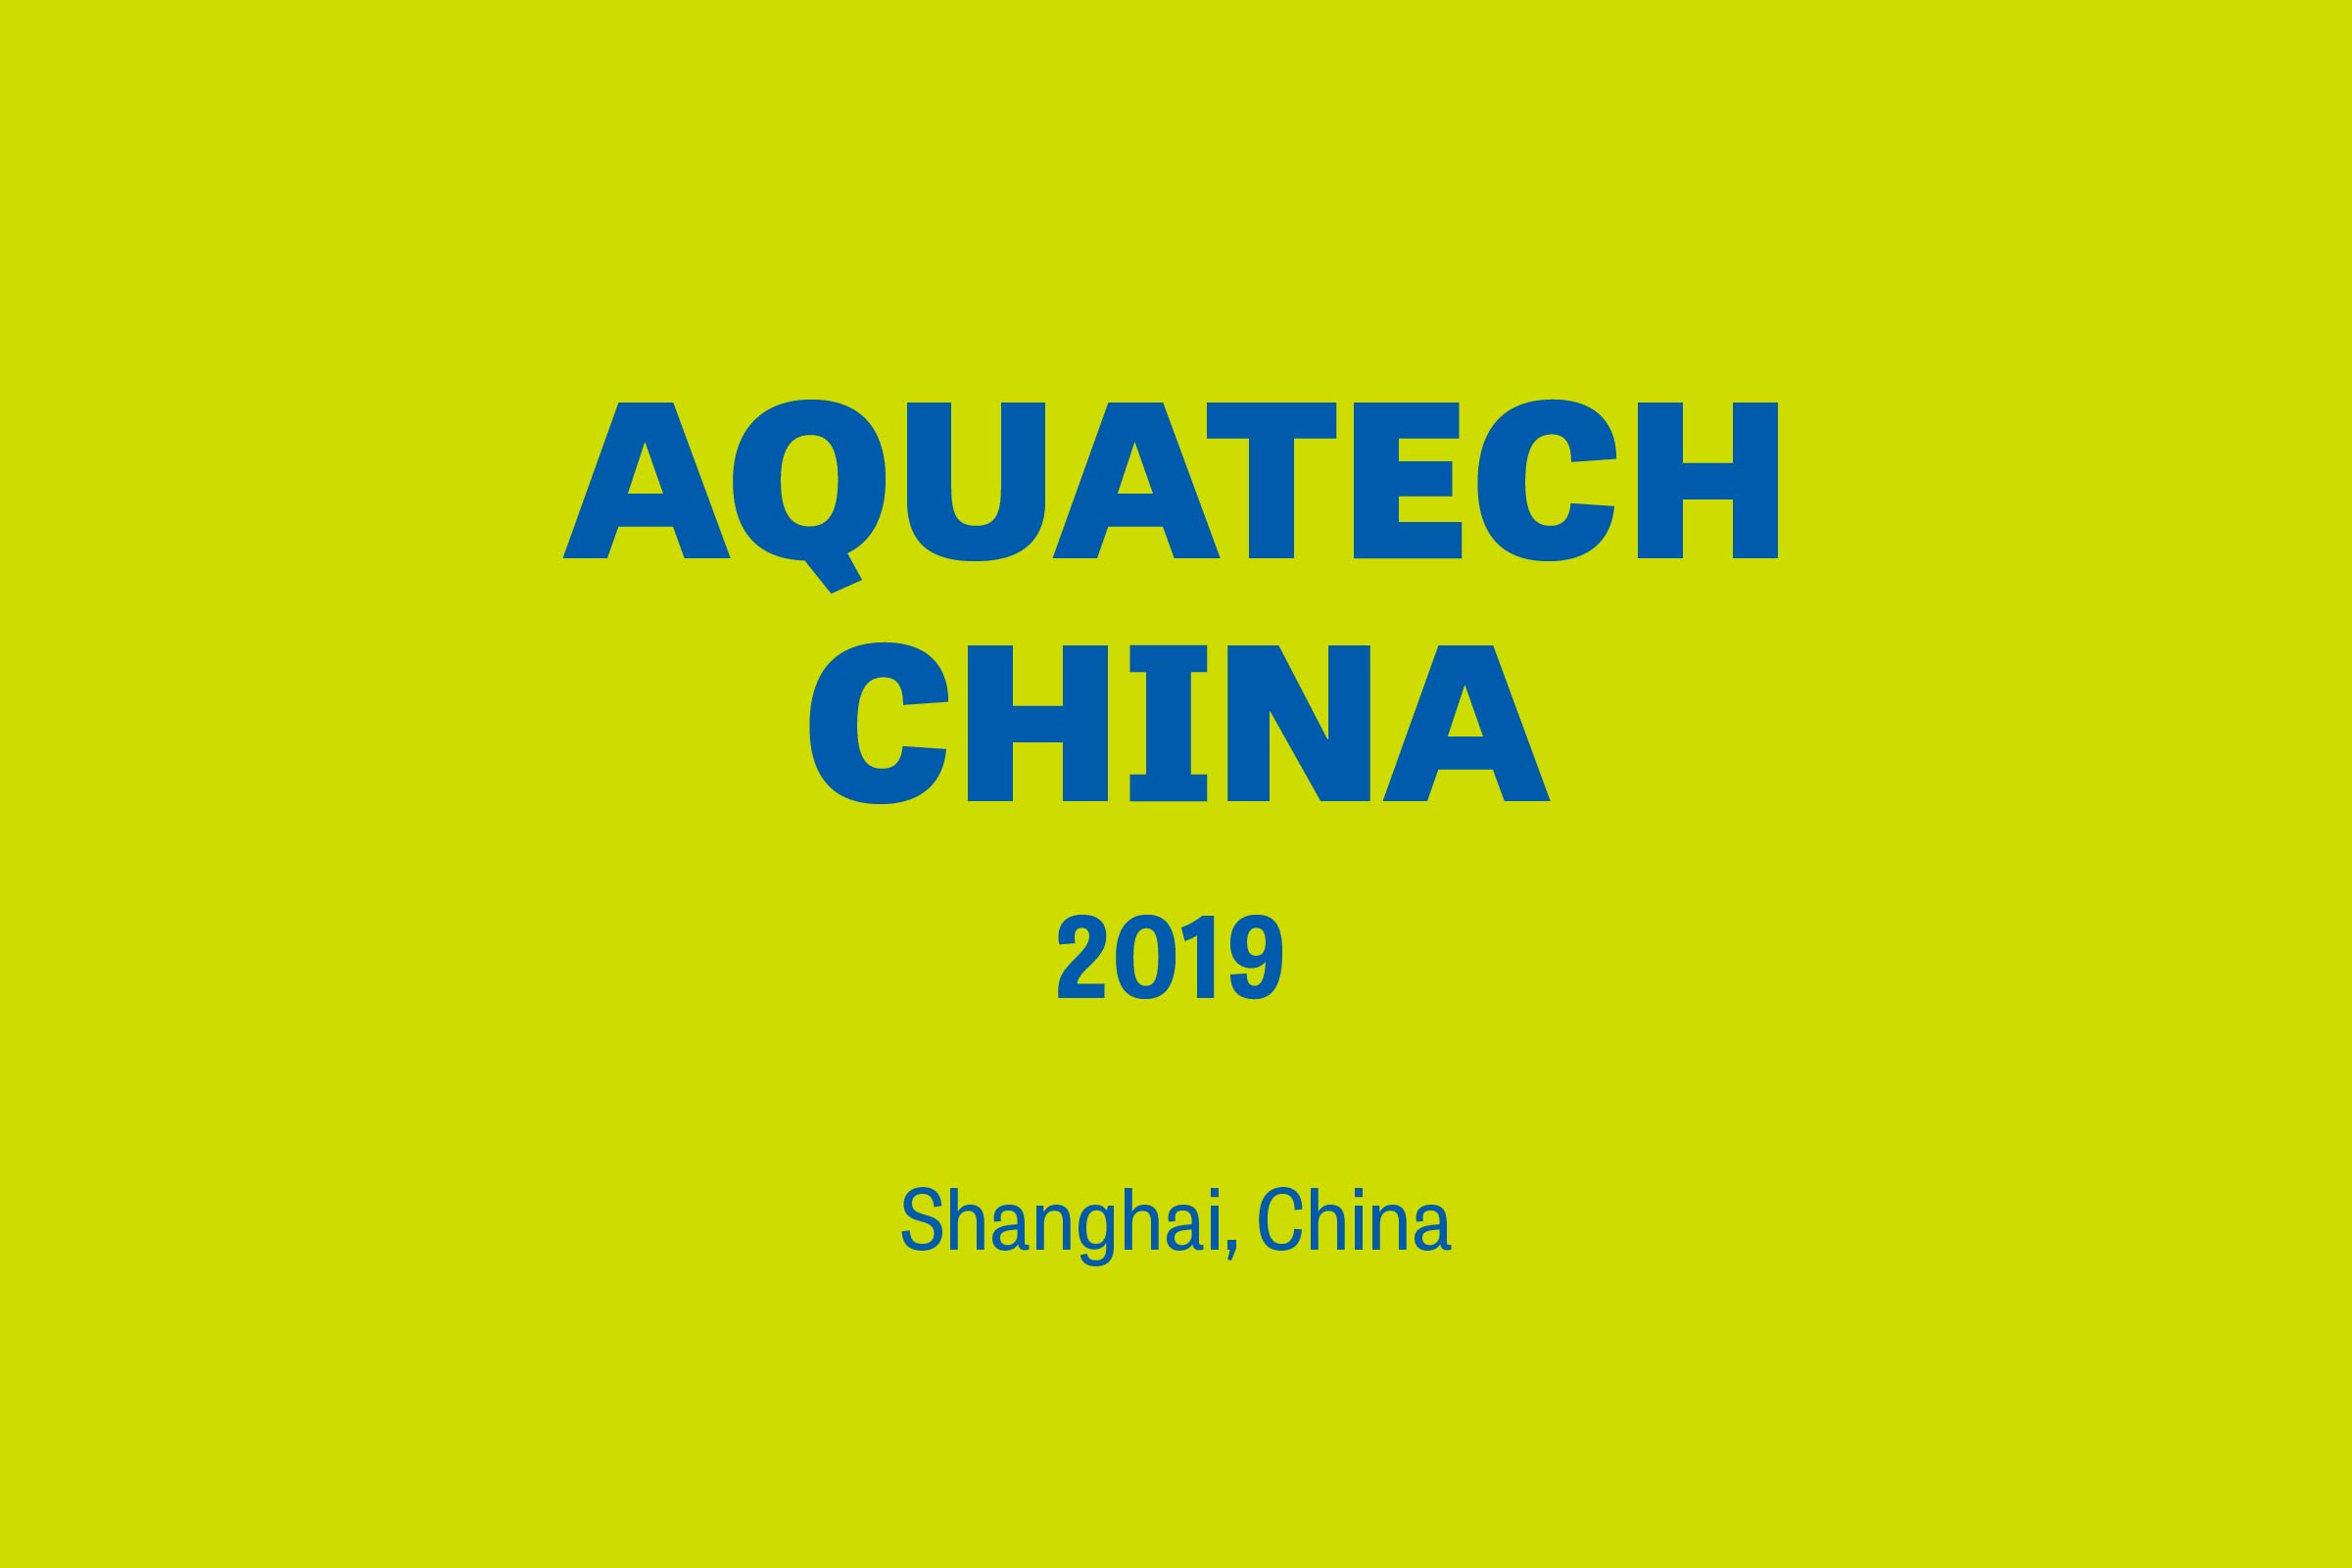 Aquatech China 2019: Trends in the POU Industry